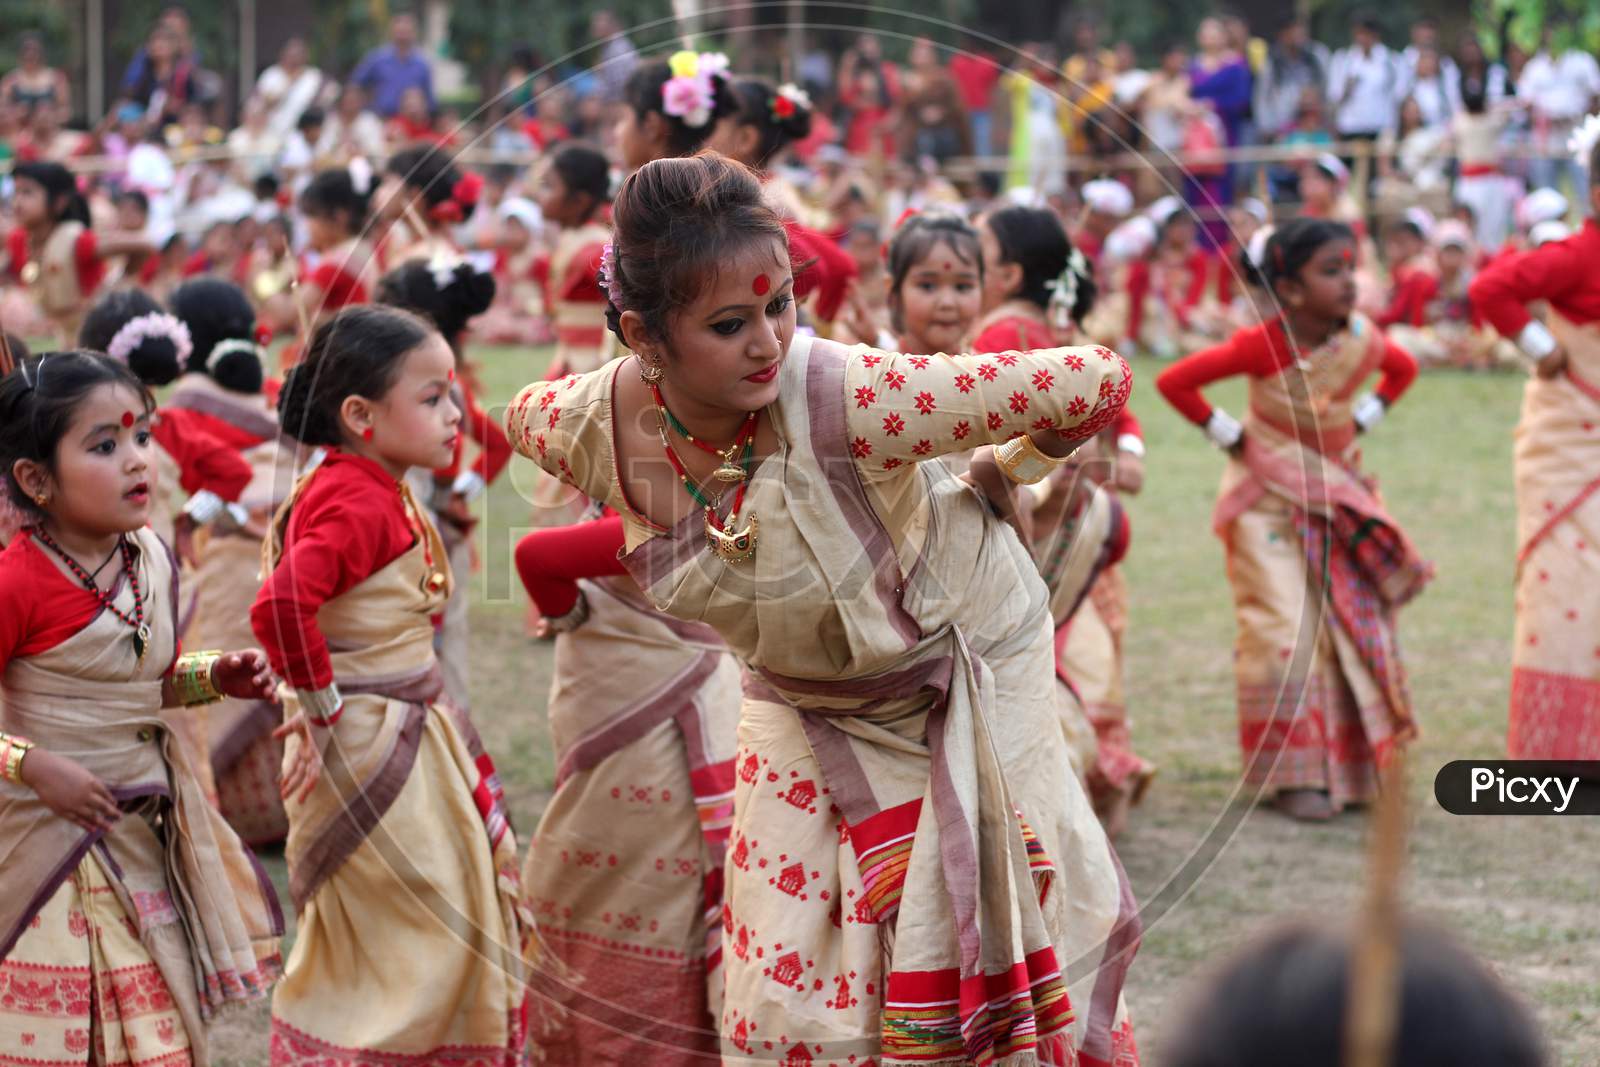 Glimpse Of Folk Dance Workshop 2018 In The View Of Upcoming Rongali Bihu Organised By Sankritic Mancha, Assam  In Collaboration With Ministry Of Culture, Govt. Of India.